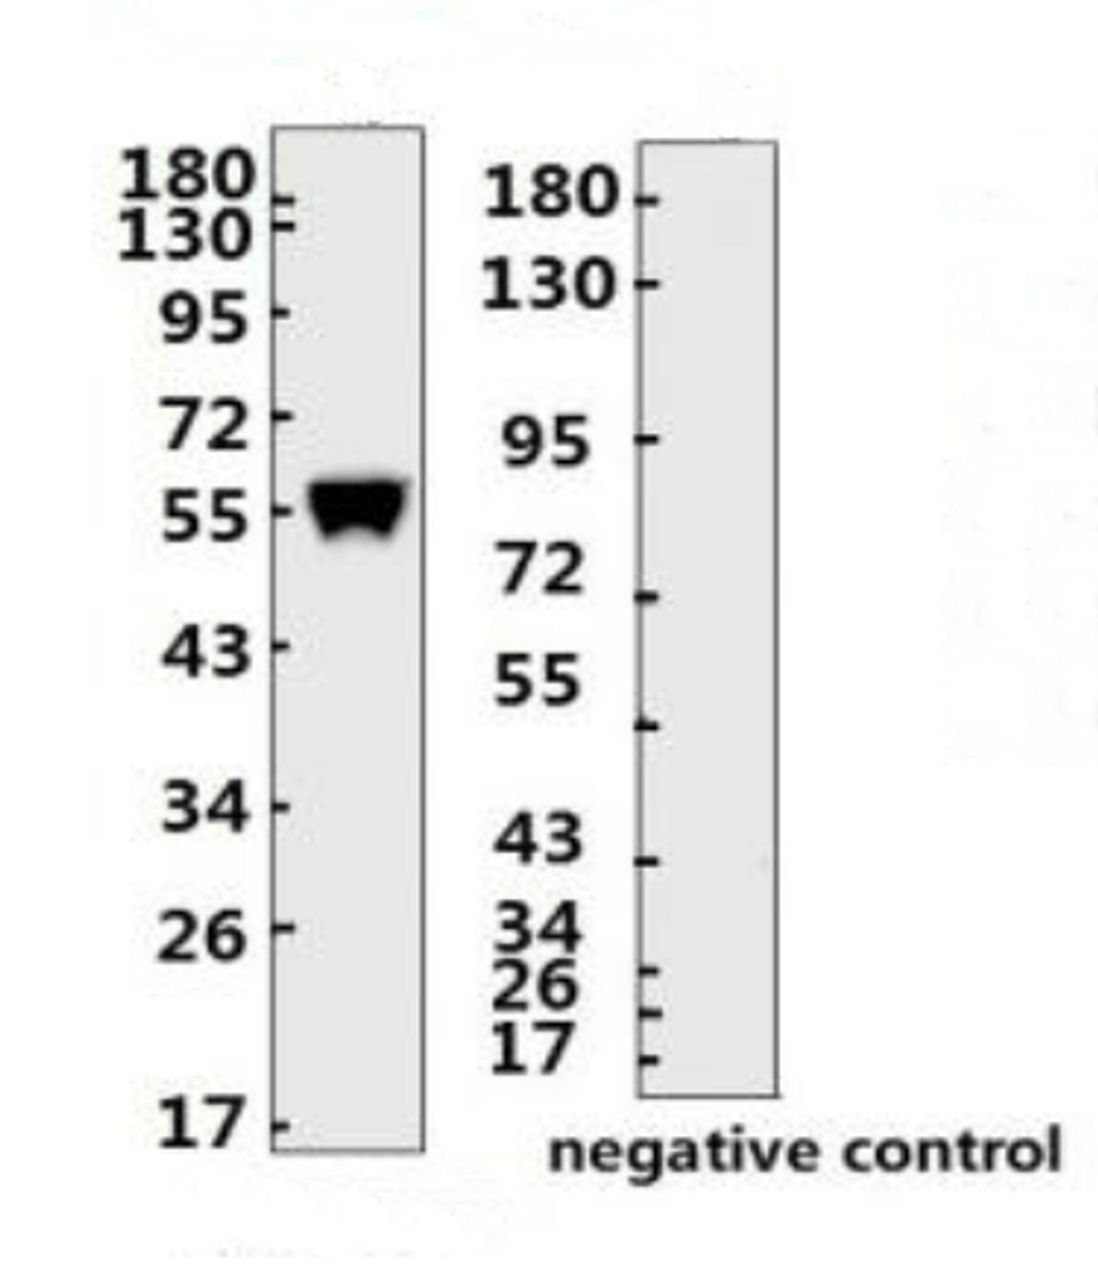 <strong>Figure 1 Western Blot Validation with Recombinant Protein</strong><br>Loading: 1ug of SARS-CoV-2 (COVID-19) nucleocapsid recombinant protein, 10-007, per lane. Antibodies: SARS-CoV-2 (COVID-19) Nucleocapsid Monoclonal Antibody, 10-540, 1:2000. Secondary: Goat anti-human IgG HRP conjugate at 1:5000 dilution.